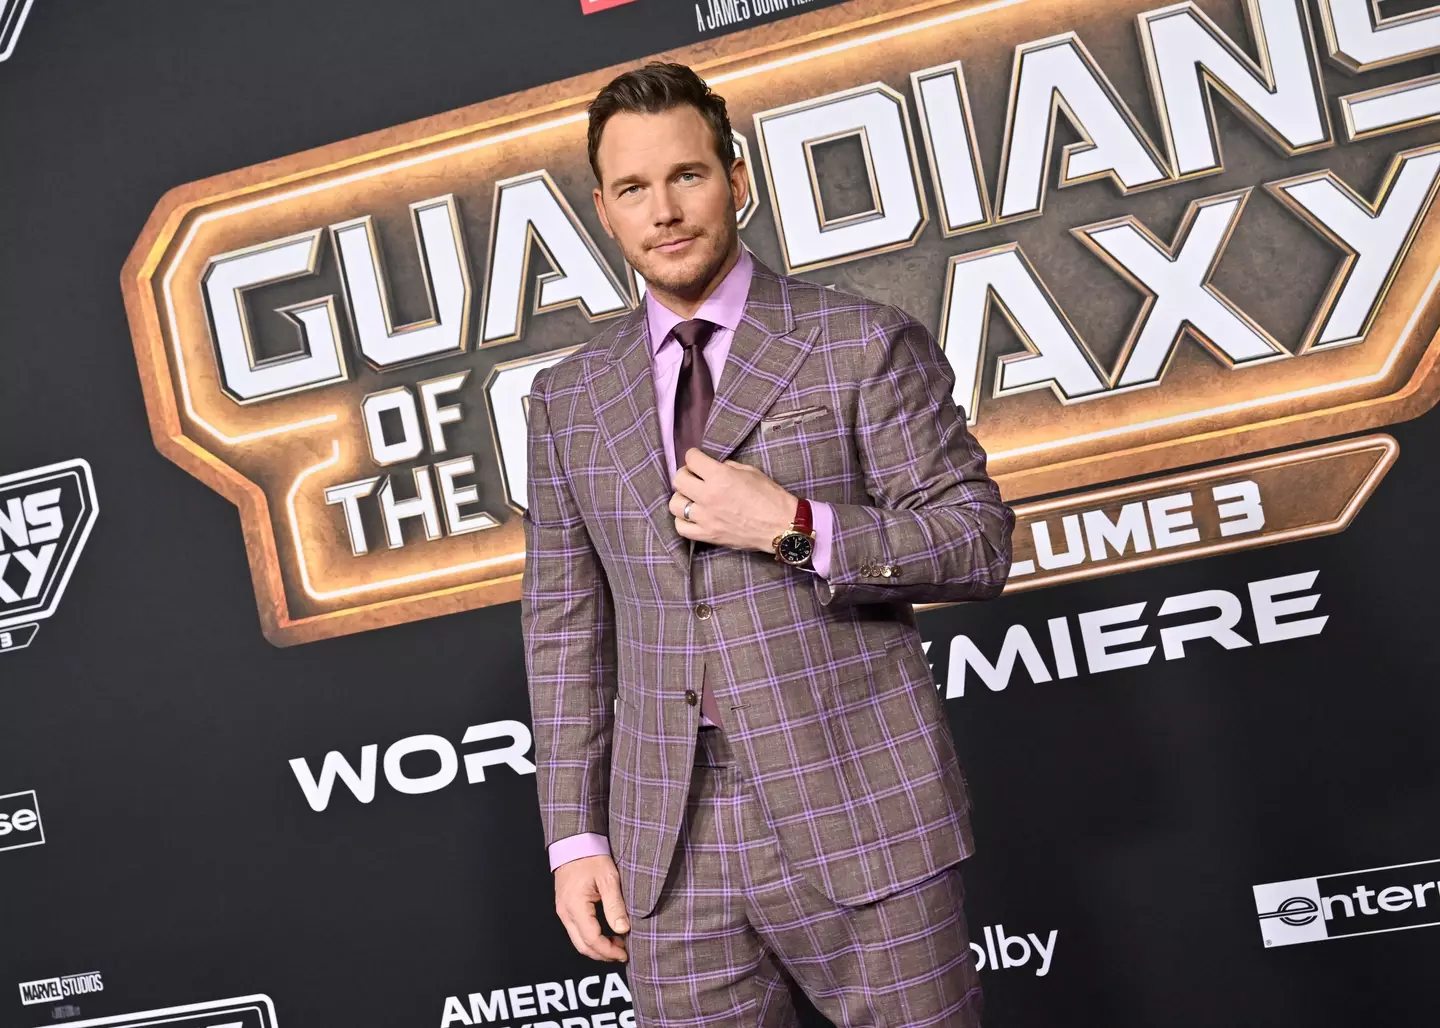 Chris Pratt has previously explained why he isn’t exactly fond of fans asking for photos.(Axelle/Bauer-Griffin/FilmMagic)